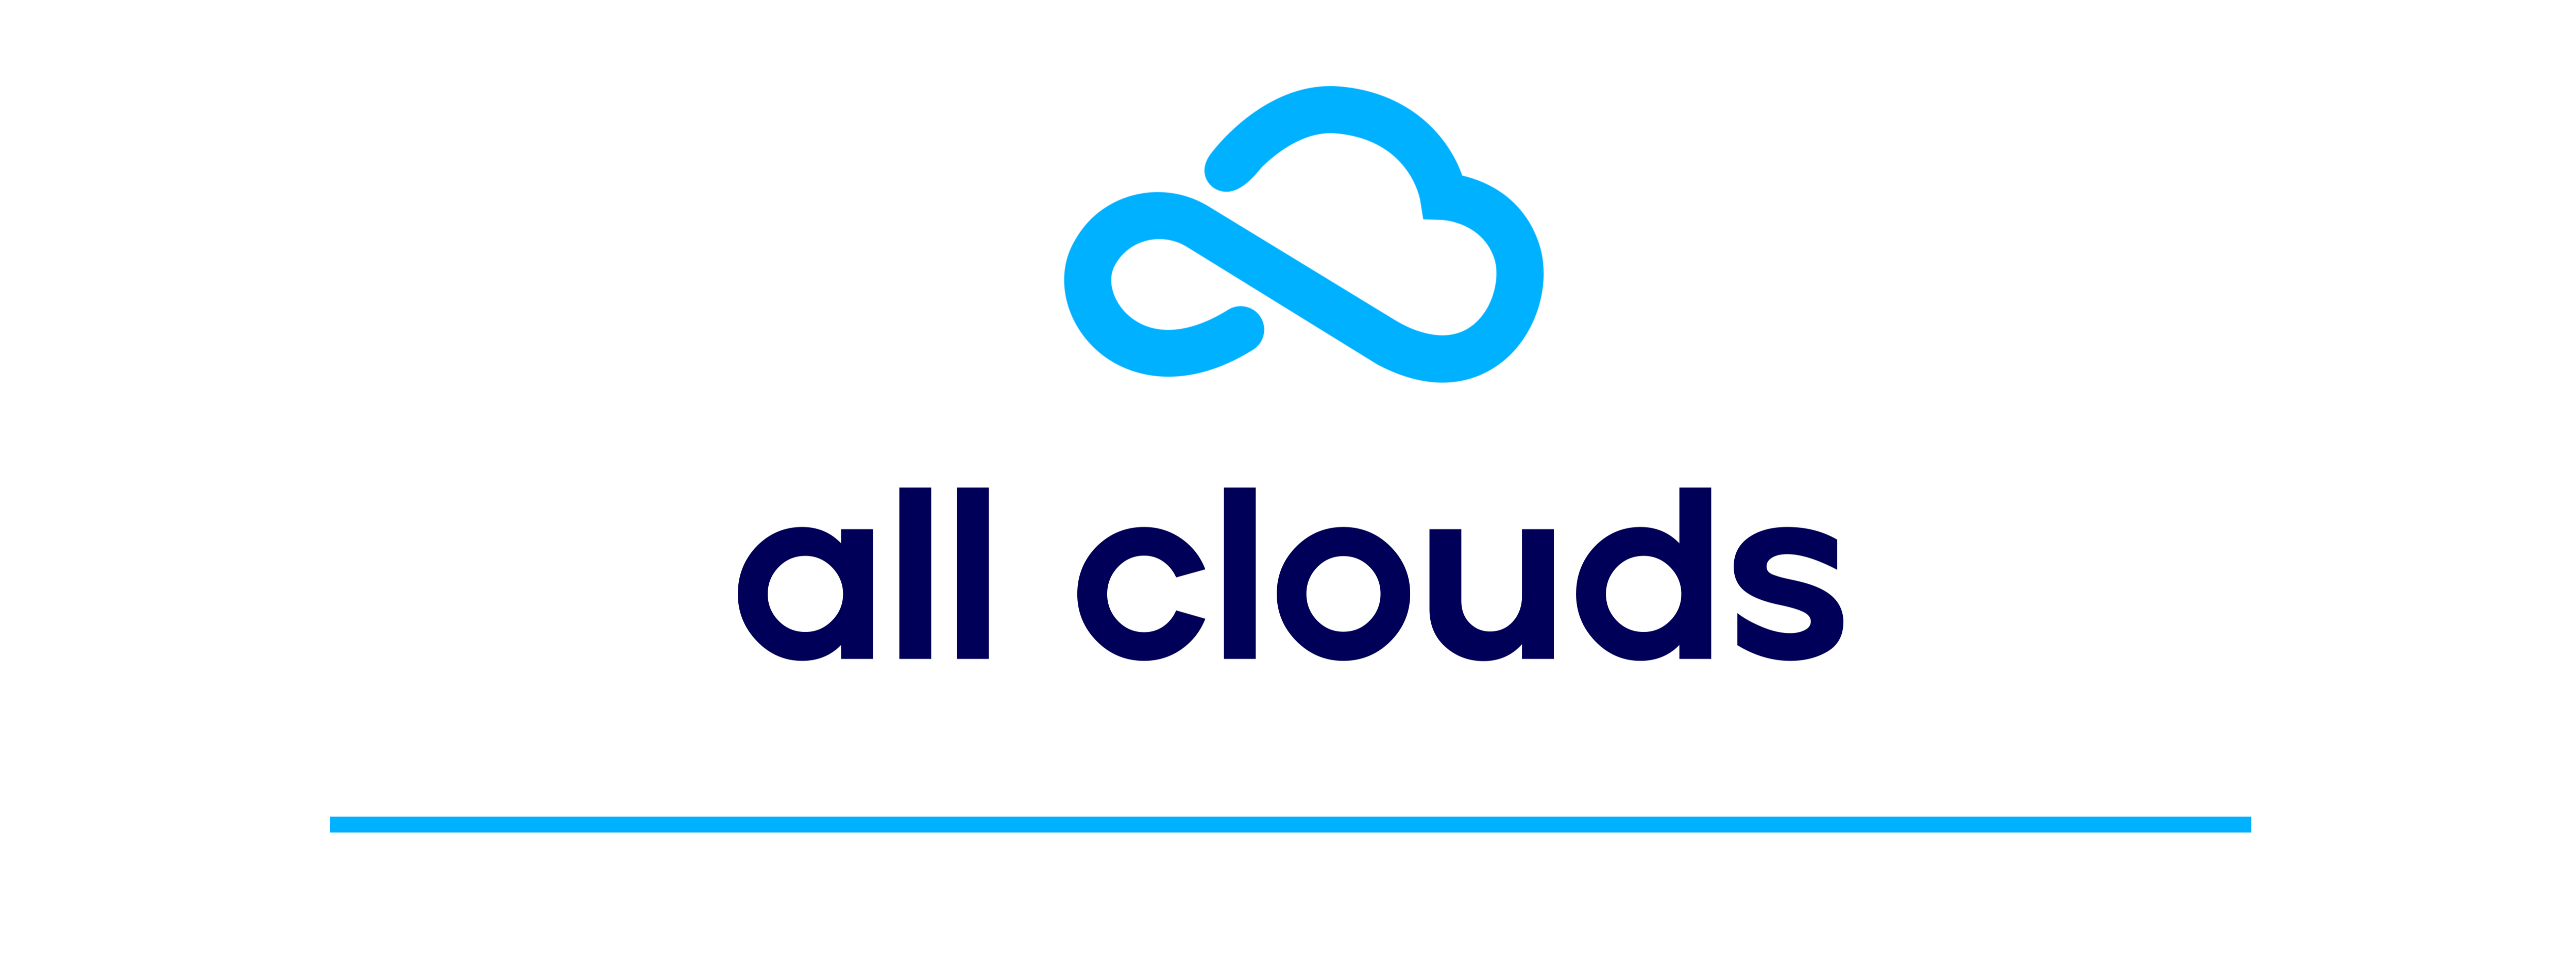 all-clouds.com | Simple Secure Trusted Cloud Advisor | Hire Cloud Engineer | Submit Cloud Project | Cloud Support